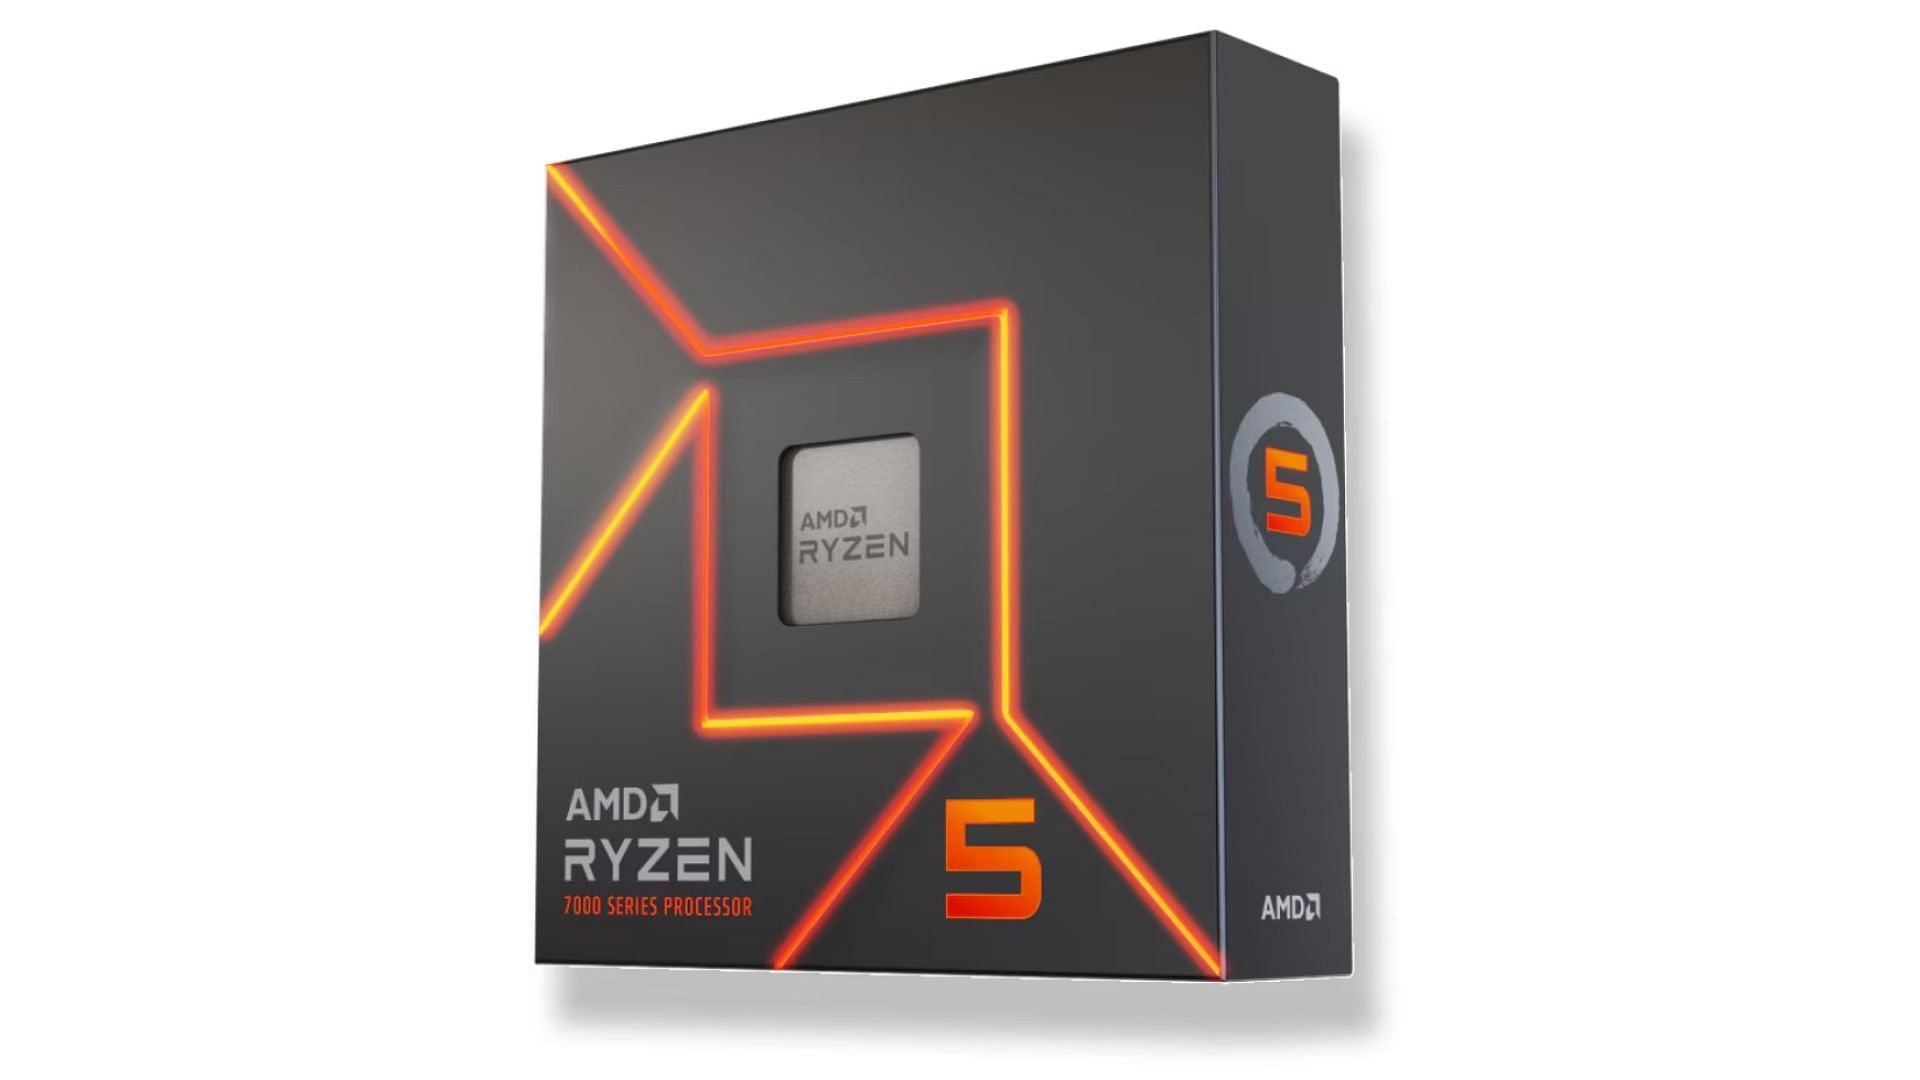 The AMD Ryzen 5 7600X is designed for enthusiast-grade budget gaming rigs (Image via AMD)